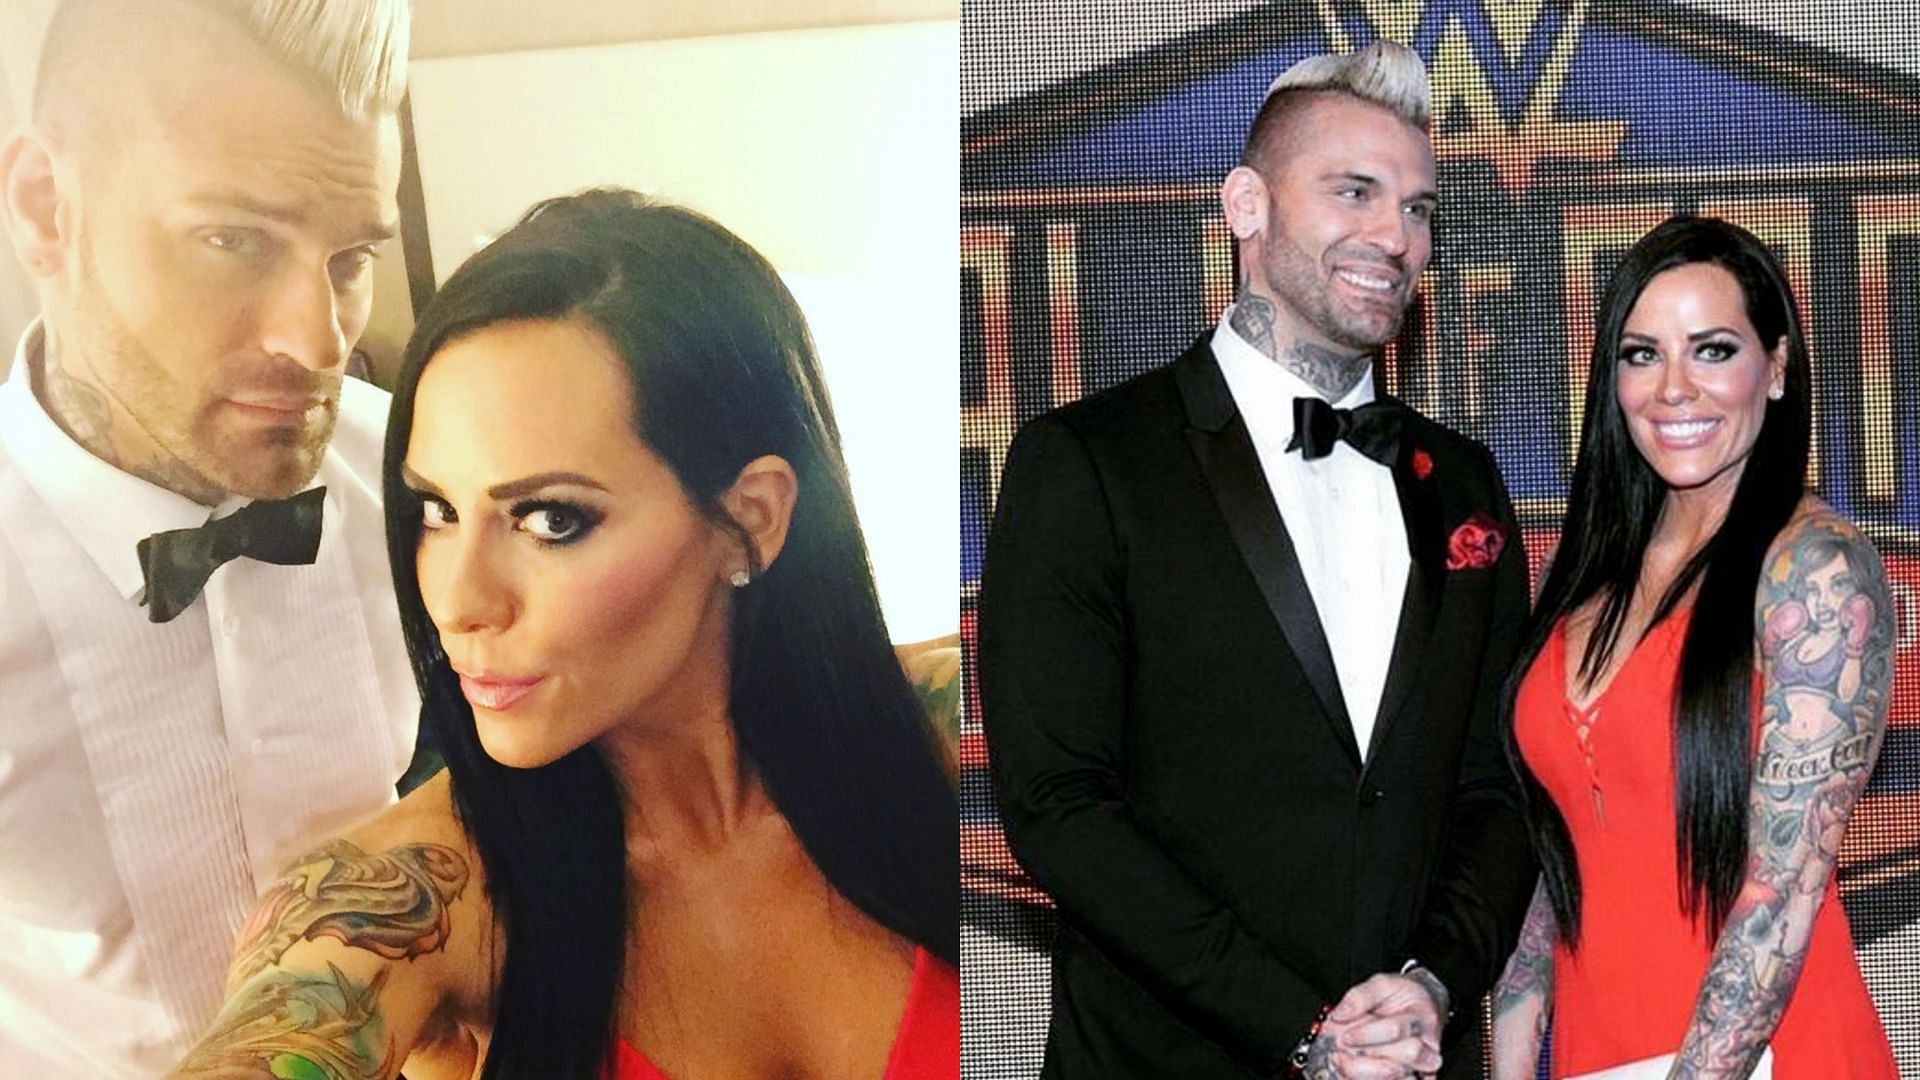 Corey Graves with his ex-wife, Amy Schneider